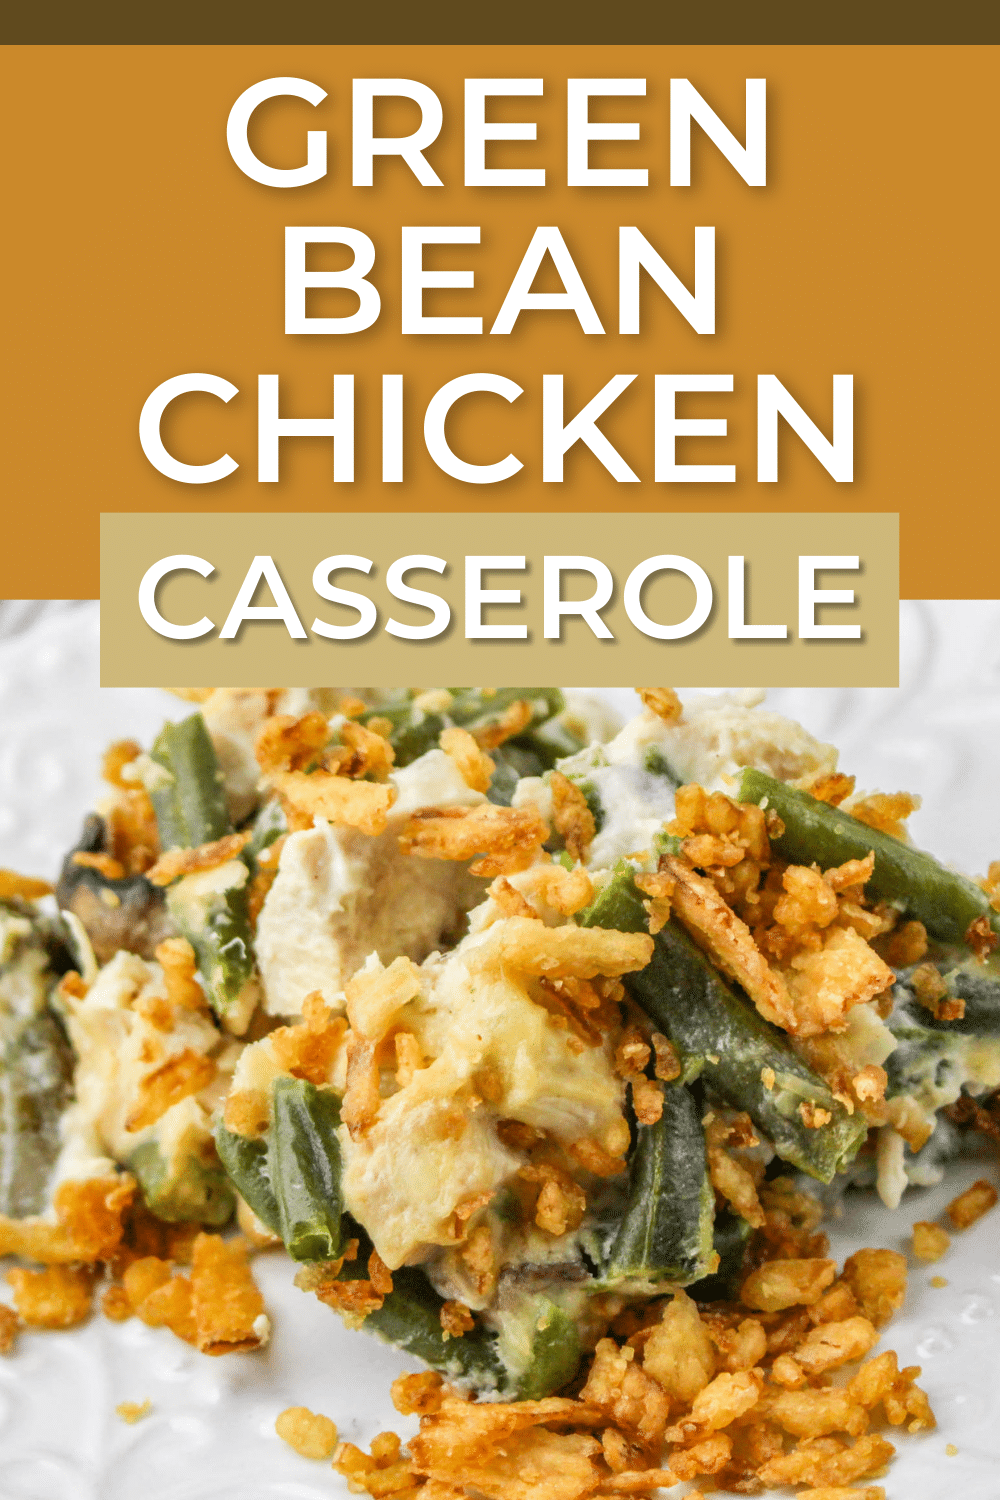 Revamp your dinner experience with this green bean chicken casserole, where tender chicken meets green beans drenched in cream sauce. #greenbeanchickencasserole #chicken #greenbeans #casseroles #greenbeancasserole via @wondermomwannab